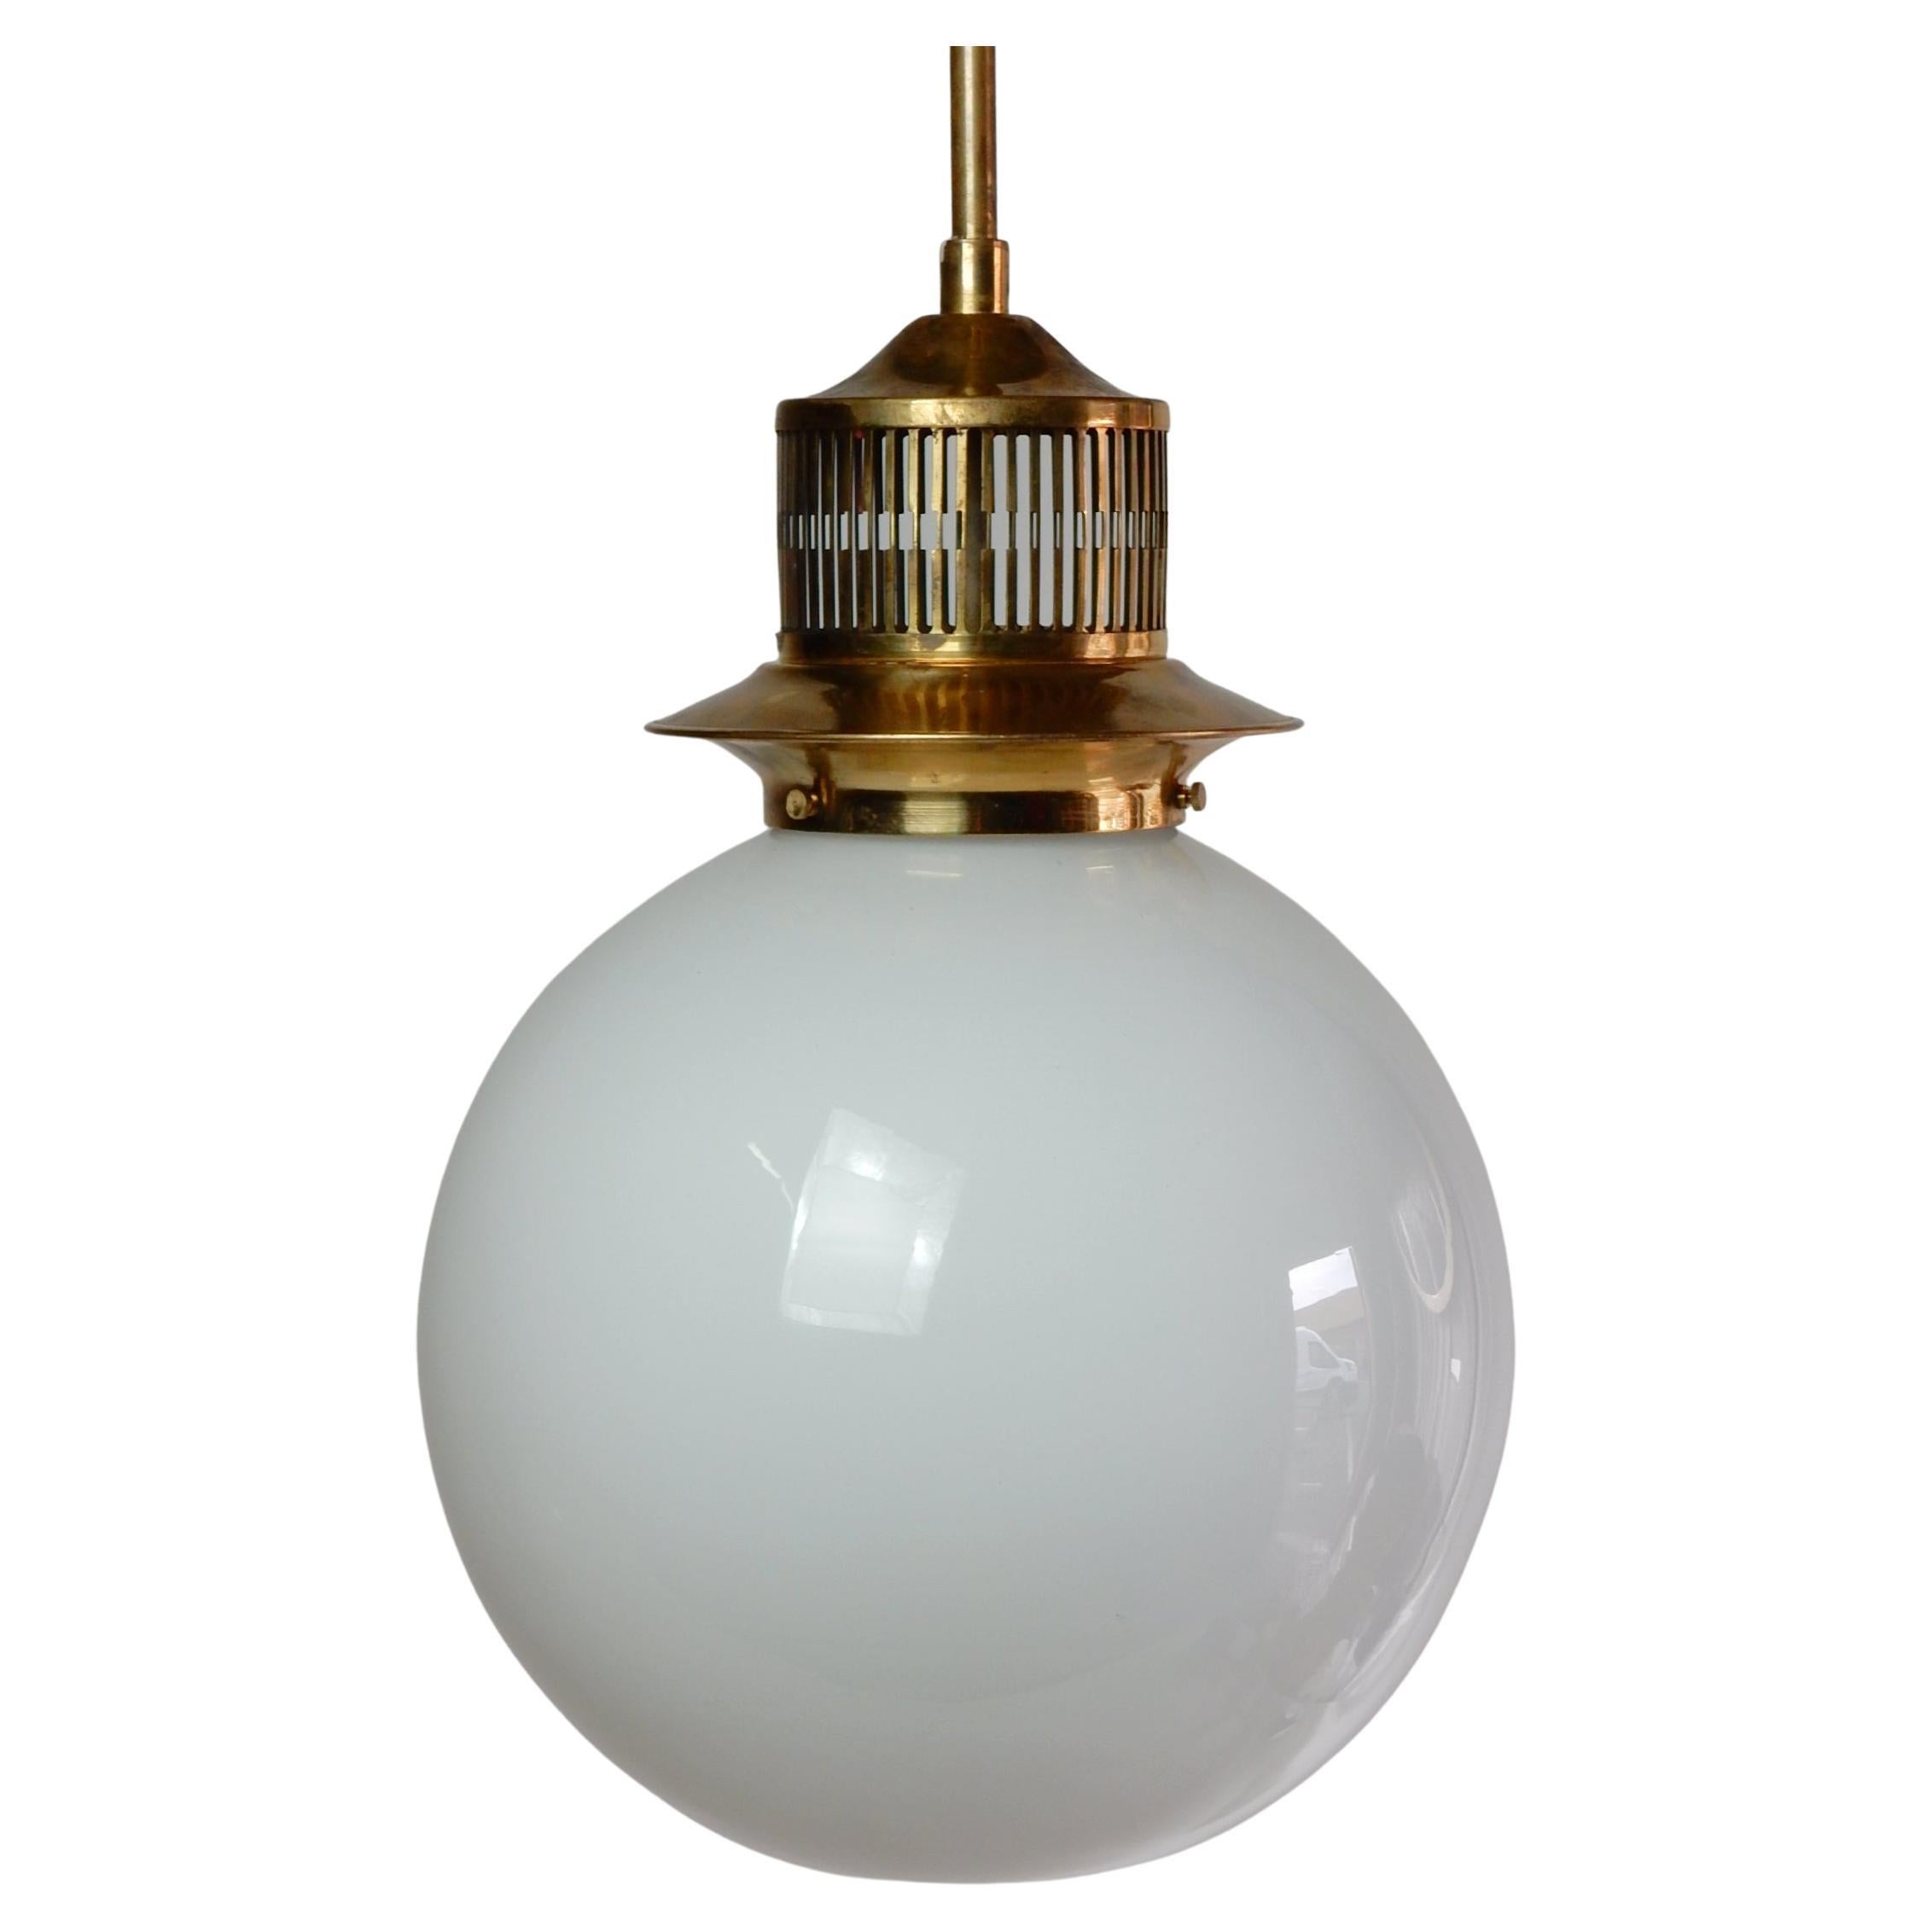 1960s brass and milk glass ball pendant lamp. Not signed by designer or manufacture.
Commercial size pendant, perfect for kitchen islands/bars etc.
Drops 33in from ceiling. Glass ball is 12in wide. 4